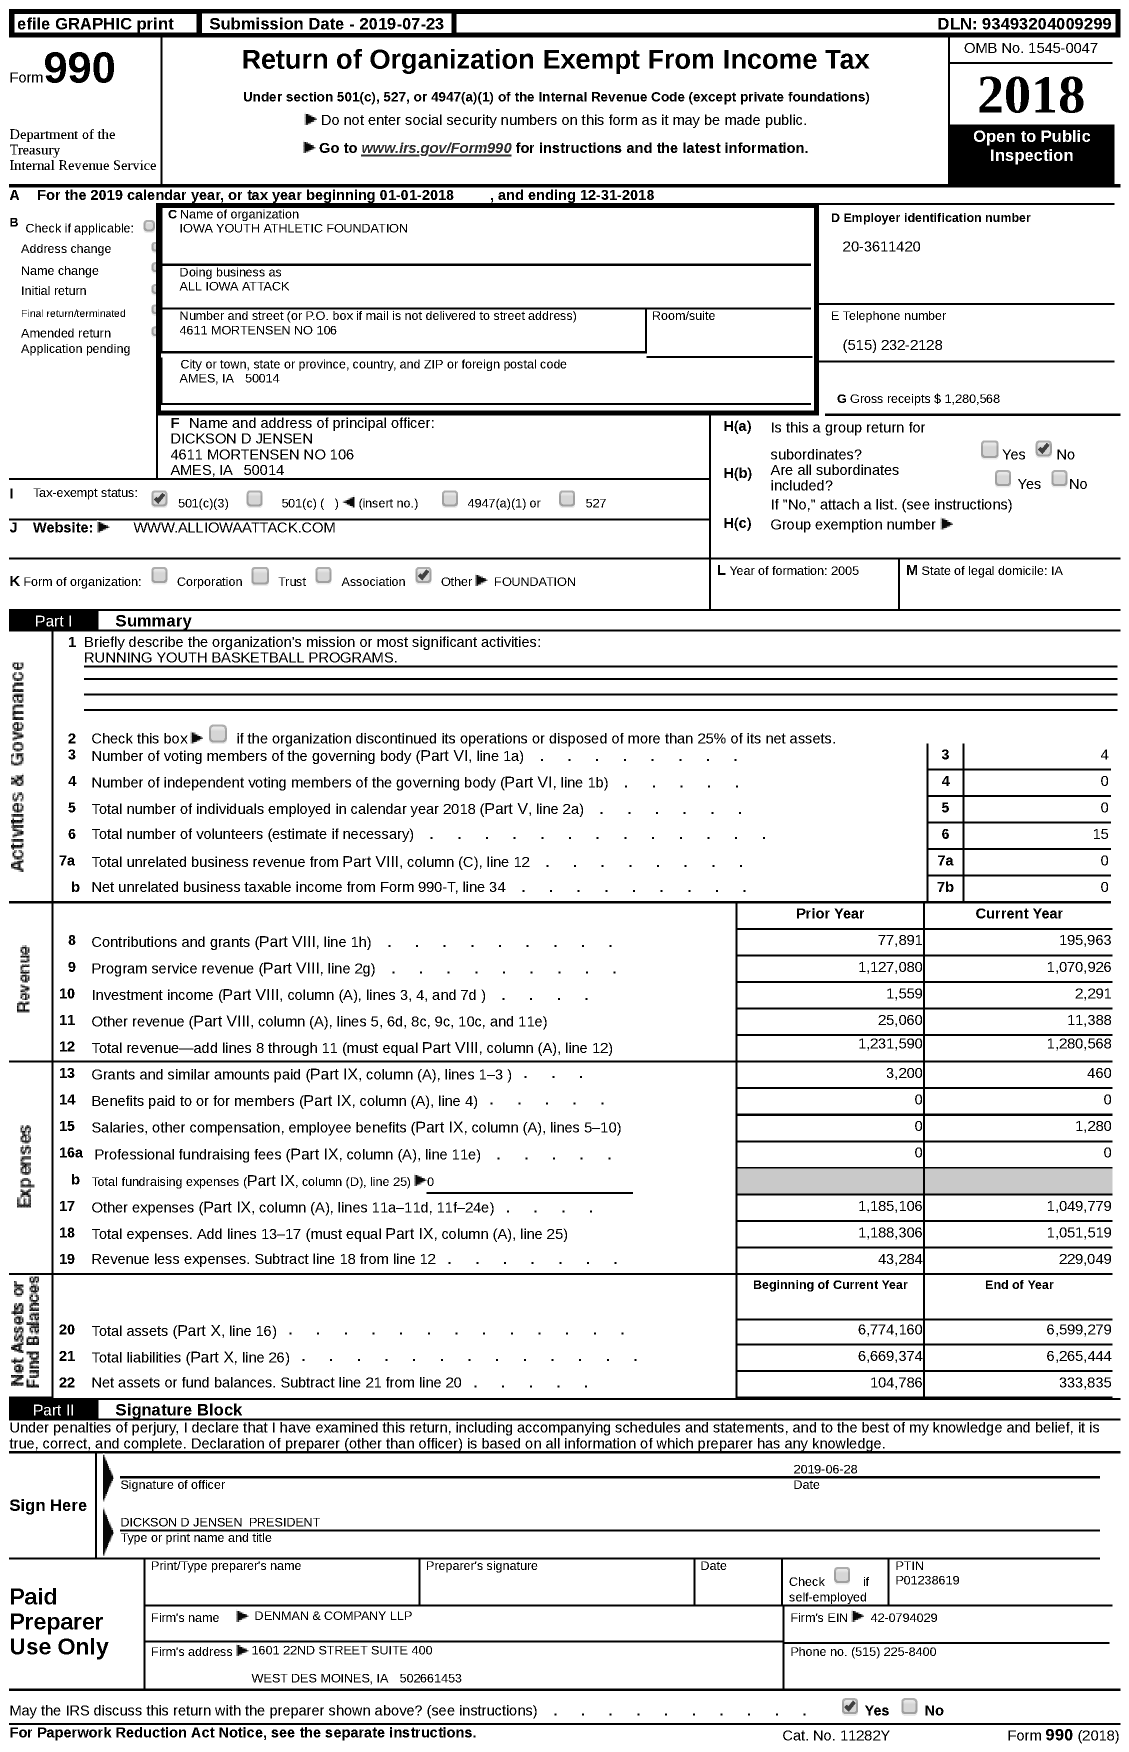 Image of first page of 2018 Form 990 for All Iowa Attack